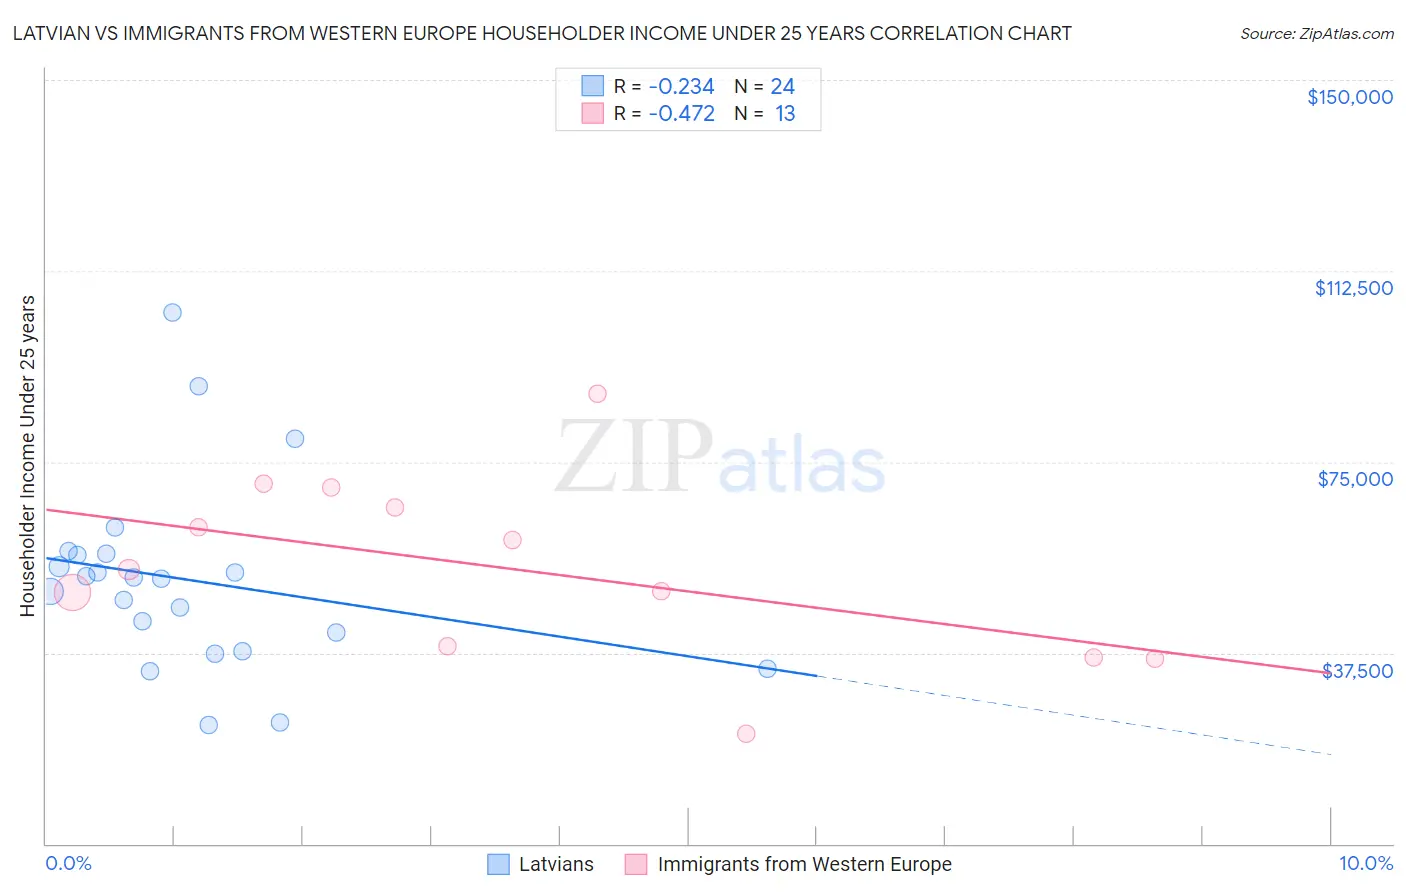 Latvian vs Immigrants from Western Europe Householder Income Under 25 years